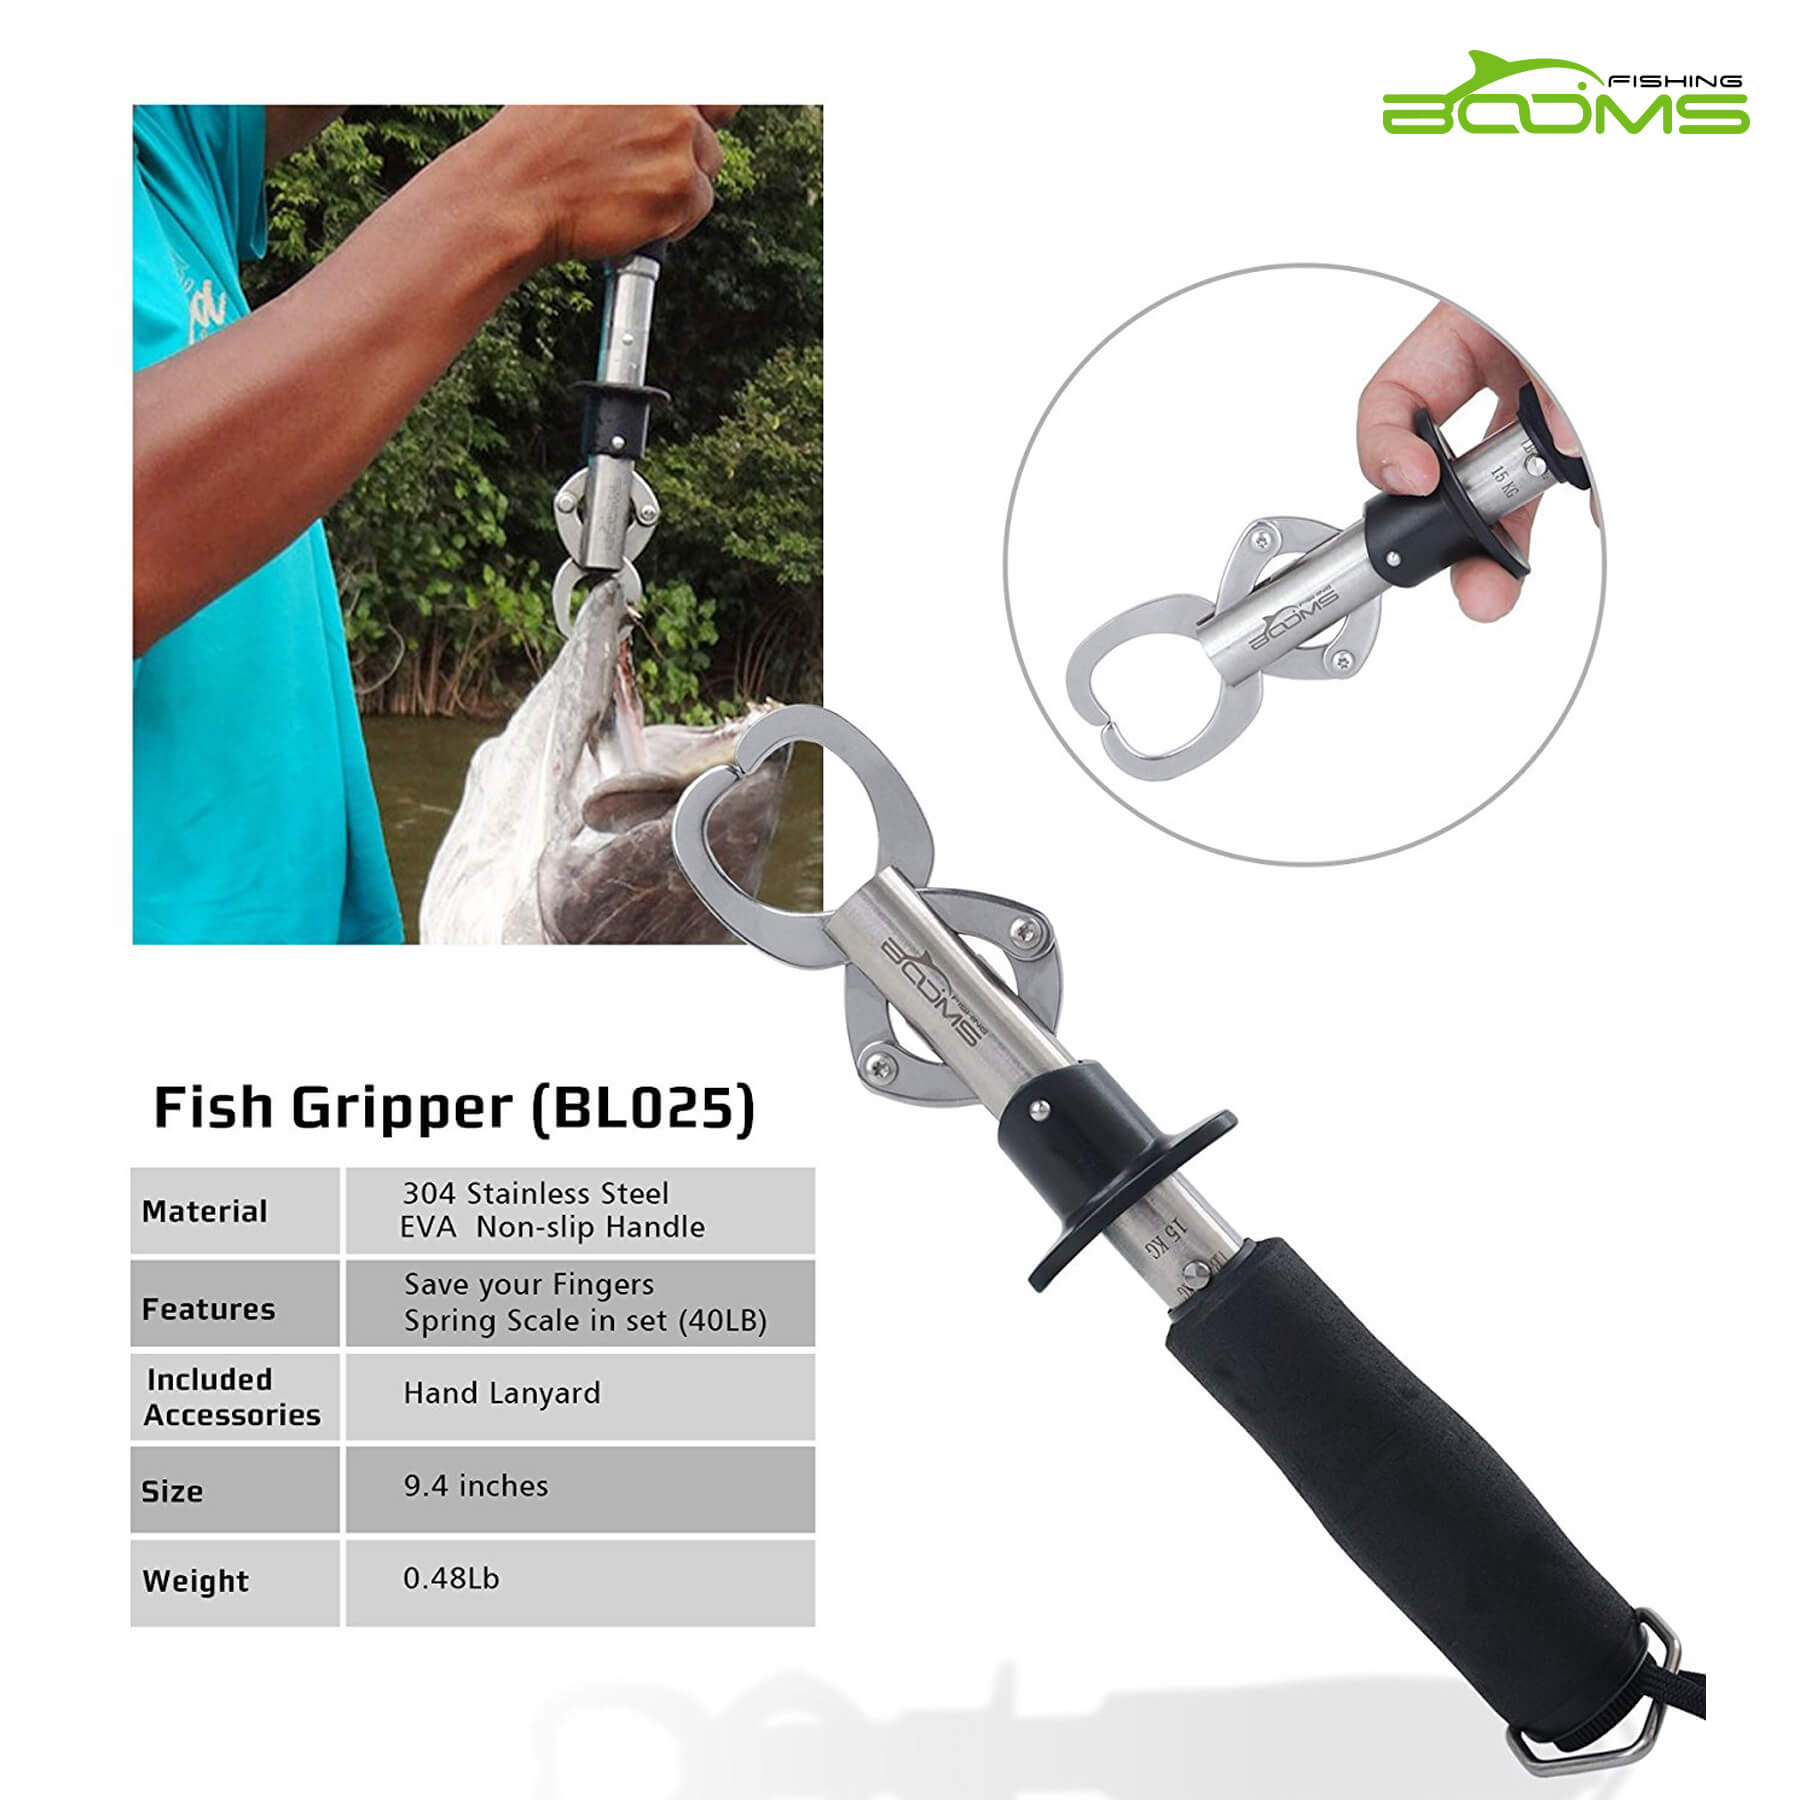 Booms Fishing G1-025 Fish Gripper with Scale – Booms Fishing Official